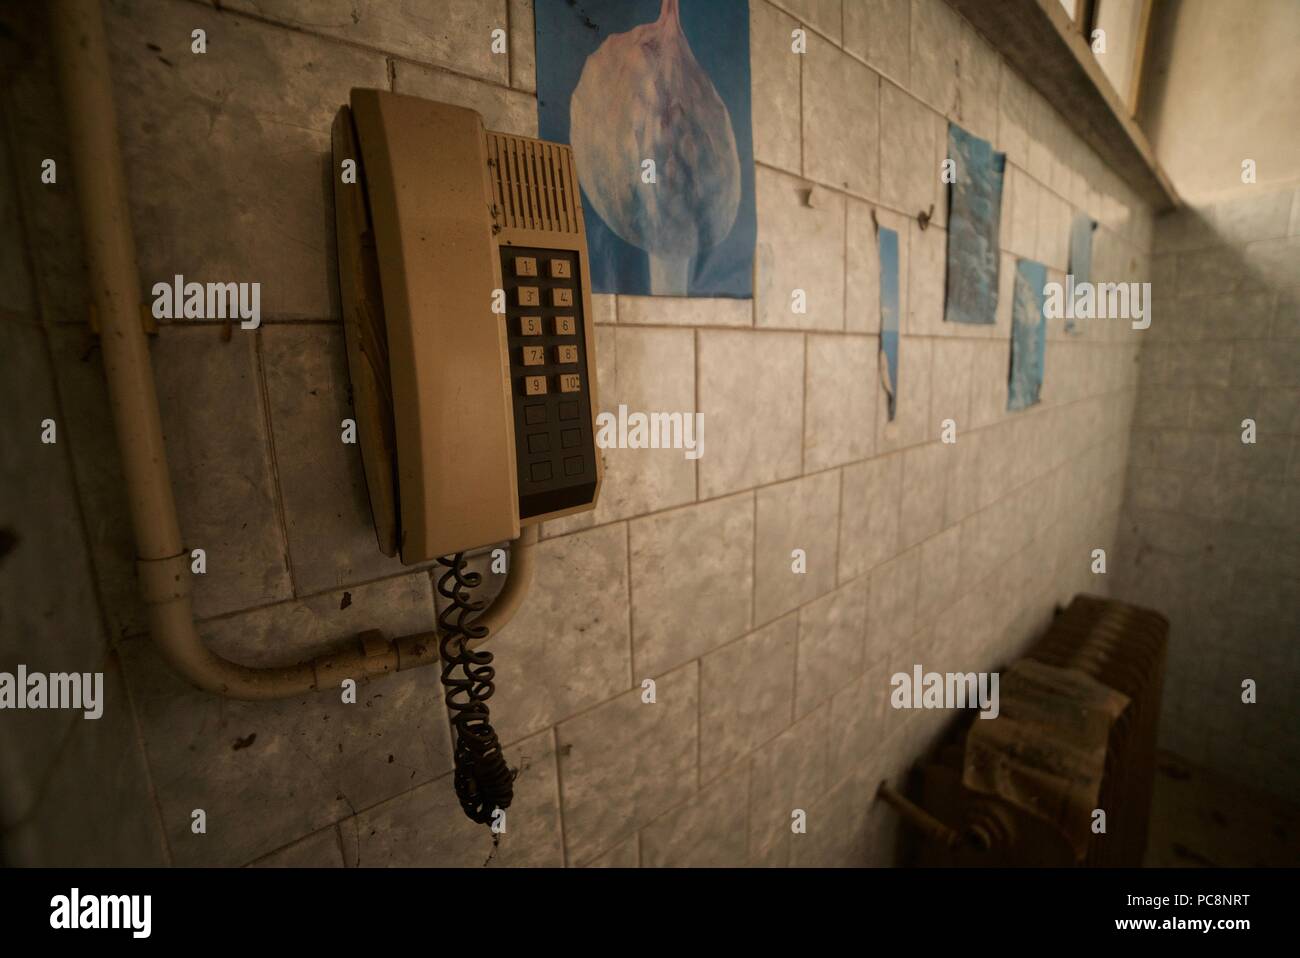 Old style telephone mounted to the wall inside an abandoned building Stock Photo